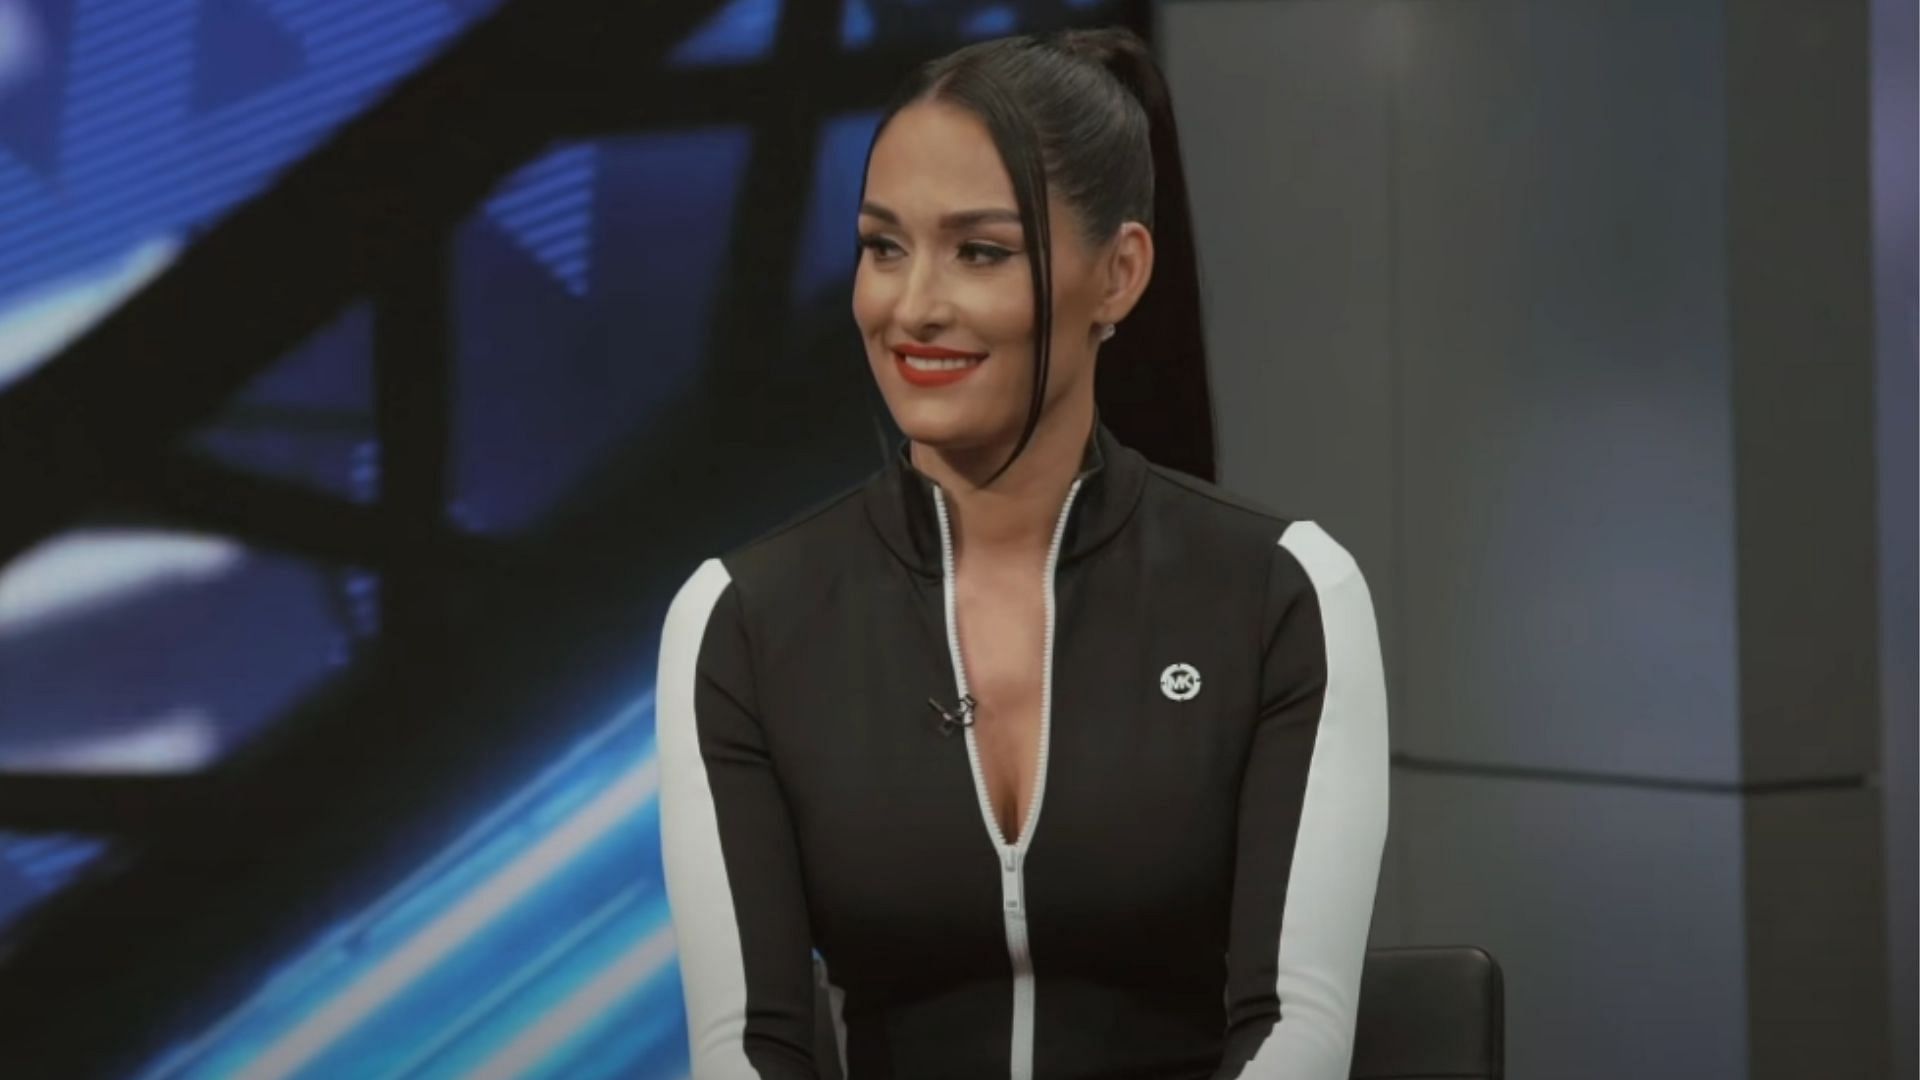 Nikki Bella is a WWE Hall of Famer and two-time Divas Champion.